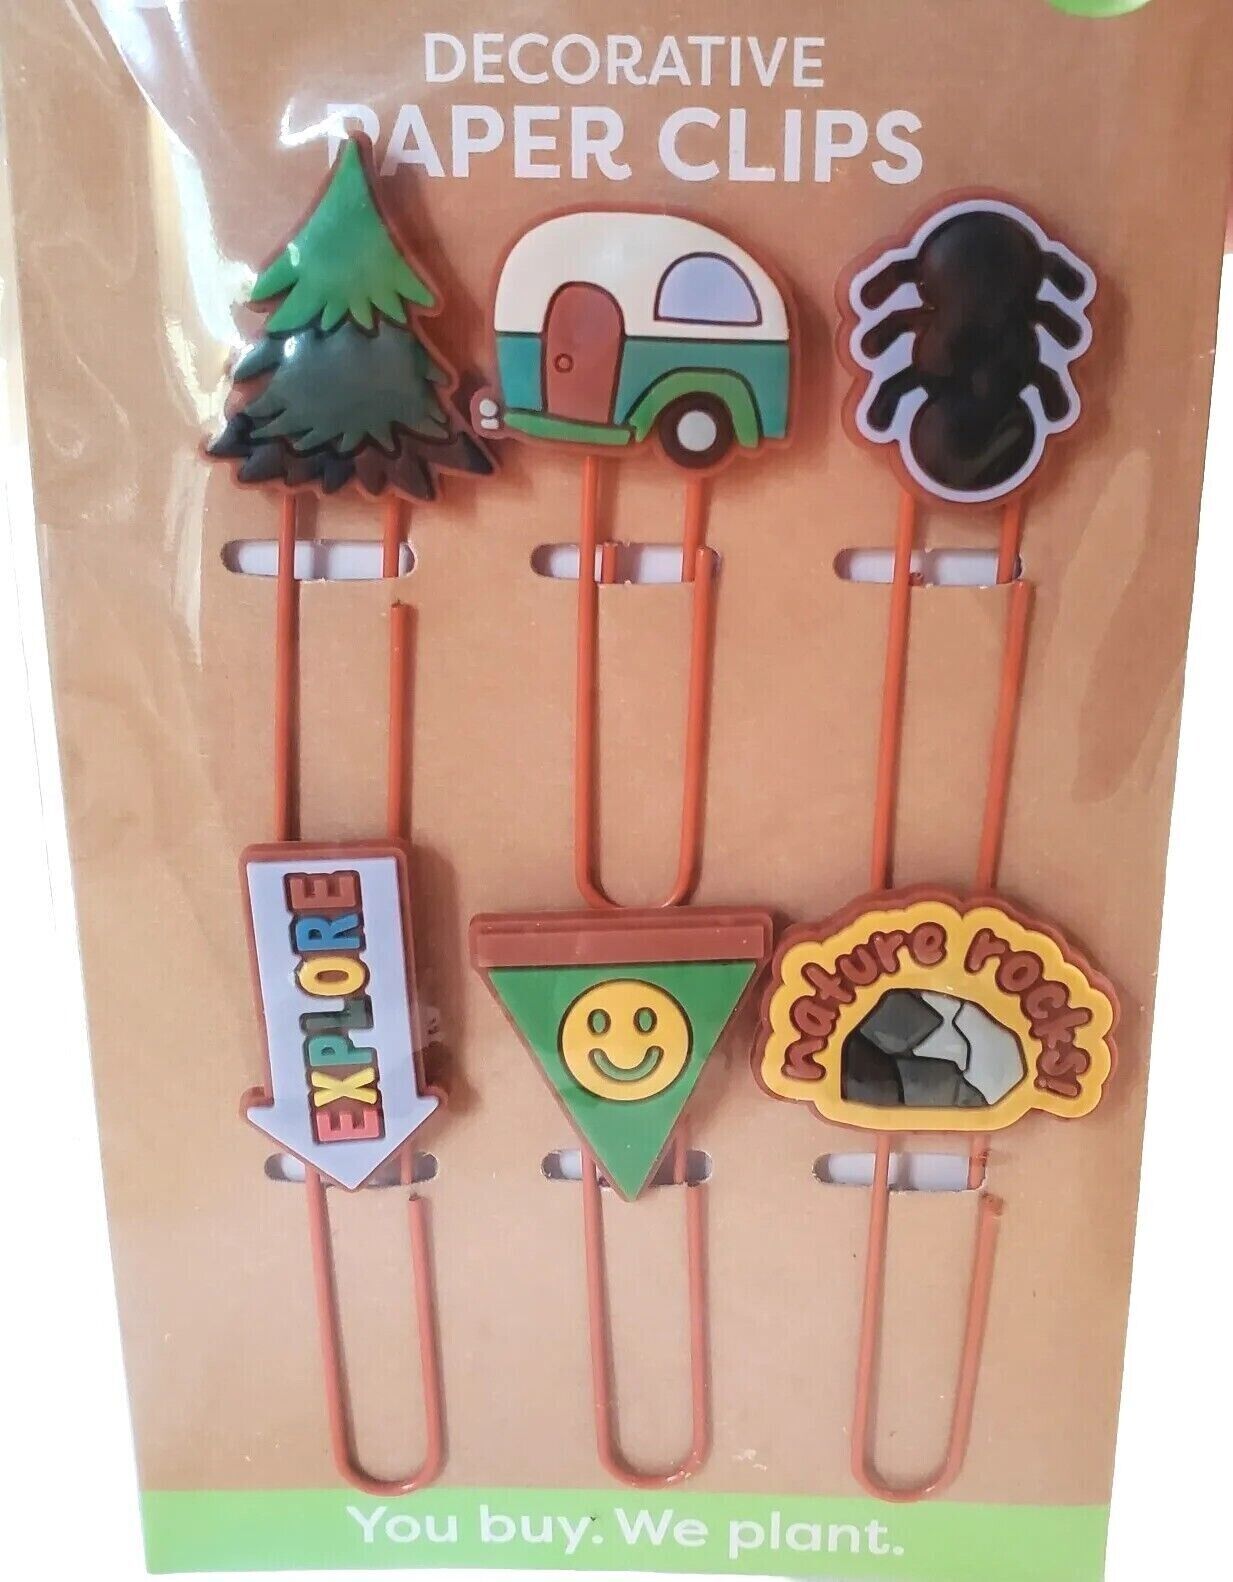 6 Decorative Paper Clips Camping Nature Theme Home & Office